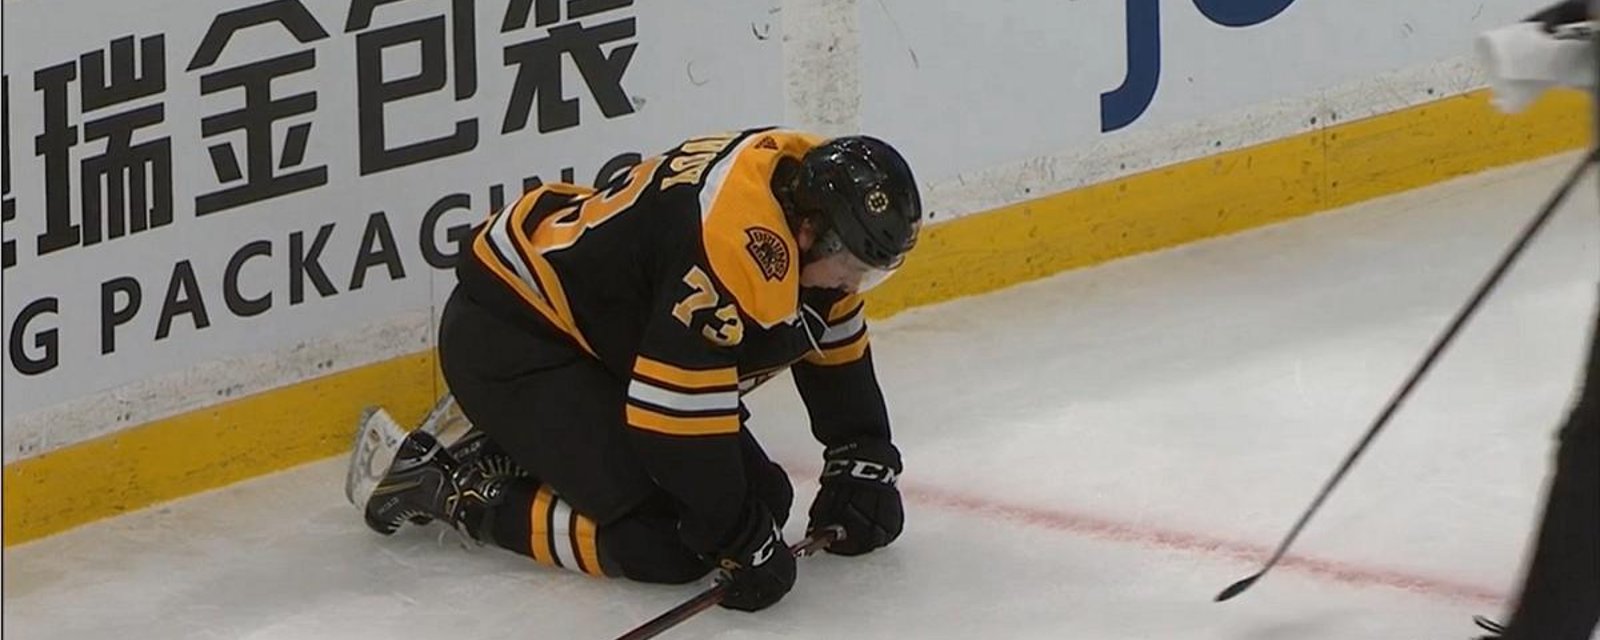 McAvoy shaken up after a big hit in his first game back from concussion.